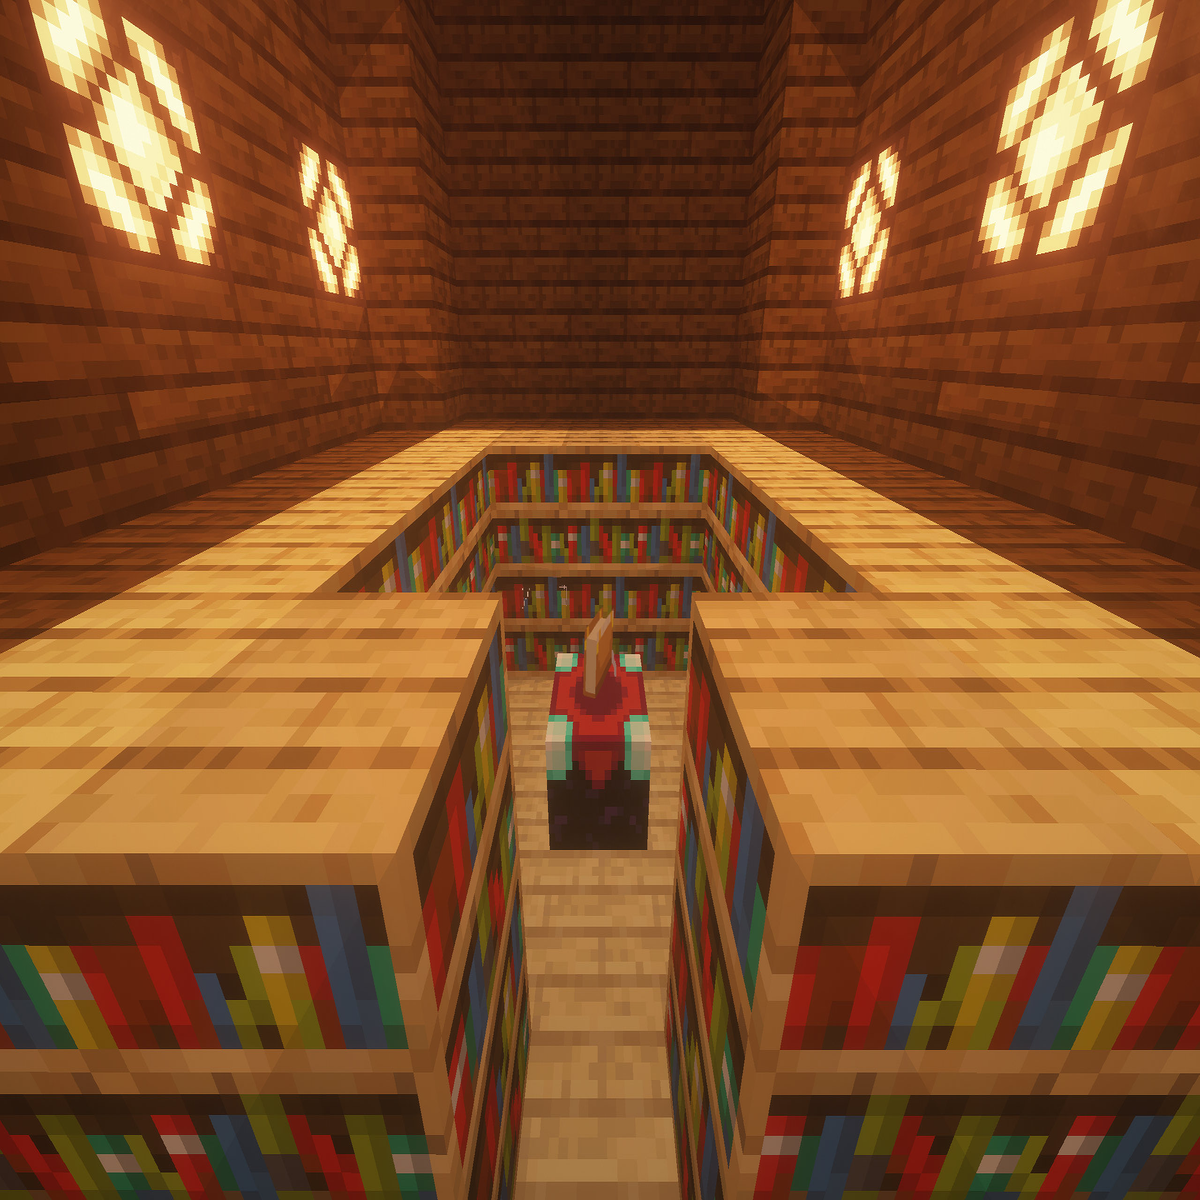 Minecraft Enchantments list: how do Enchanting Tables work?